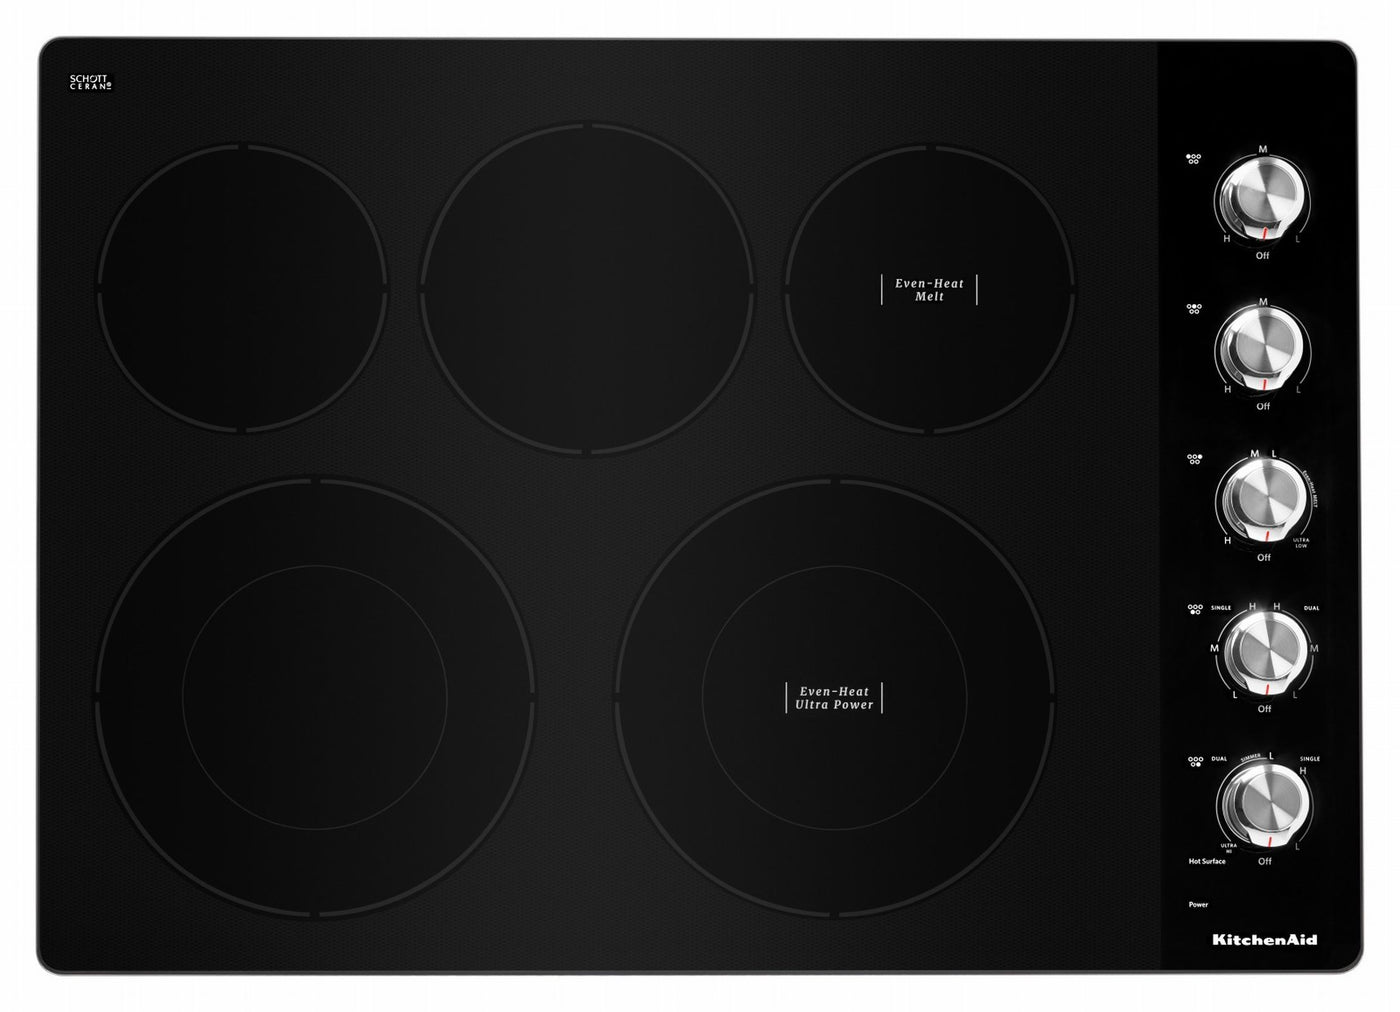 KitchenAid Stainless Steel 30" Electric Cooktop - KCES550HSS